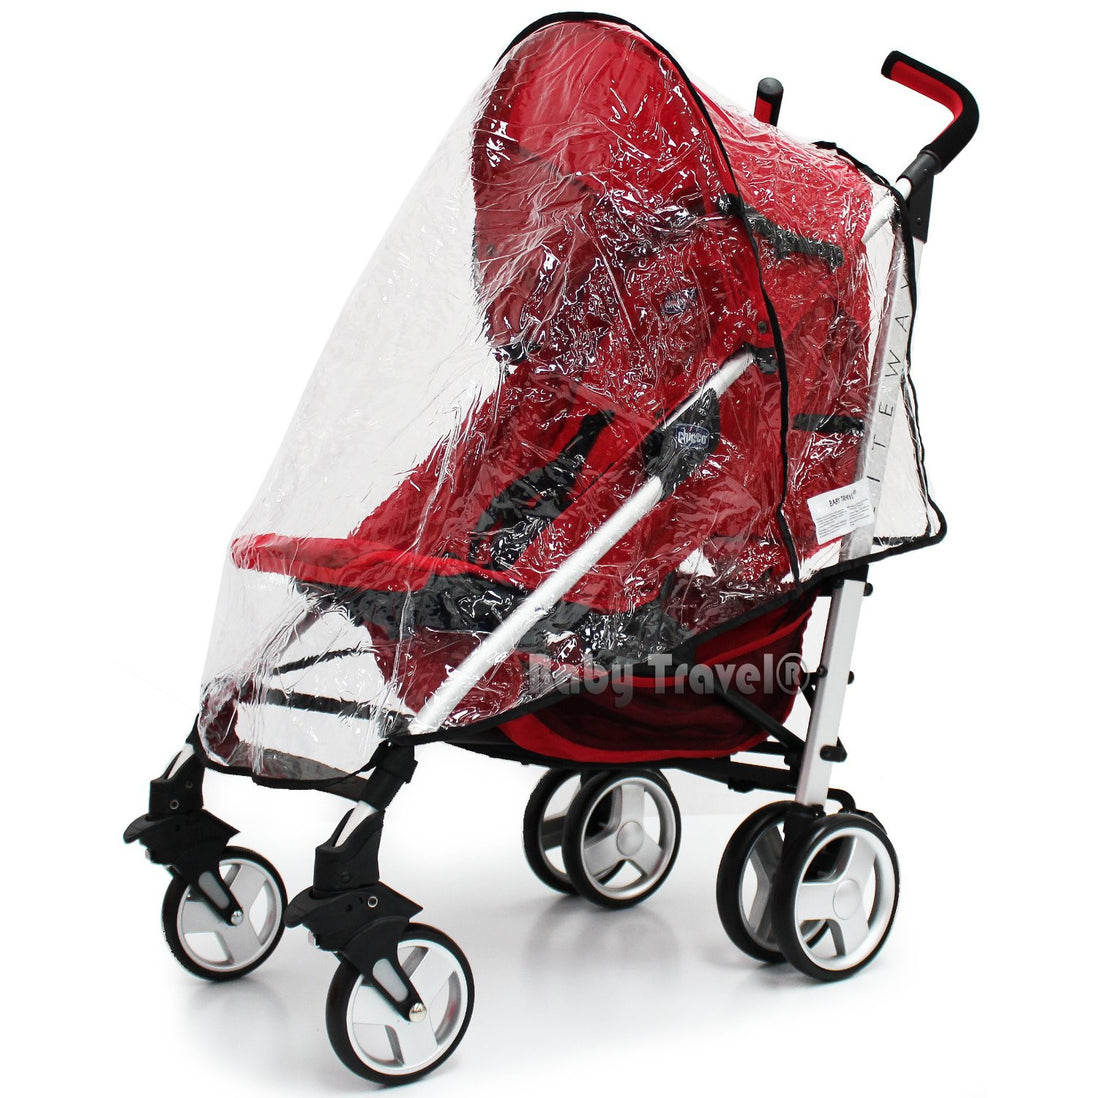 stroller cover chicco